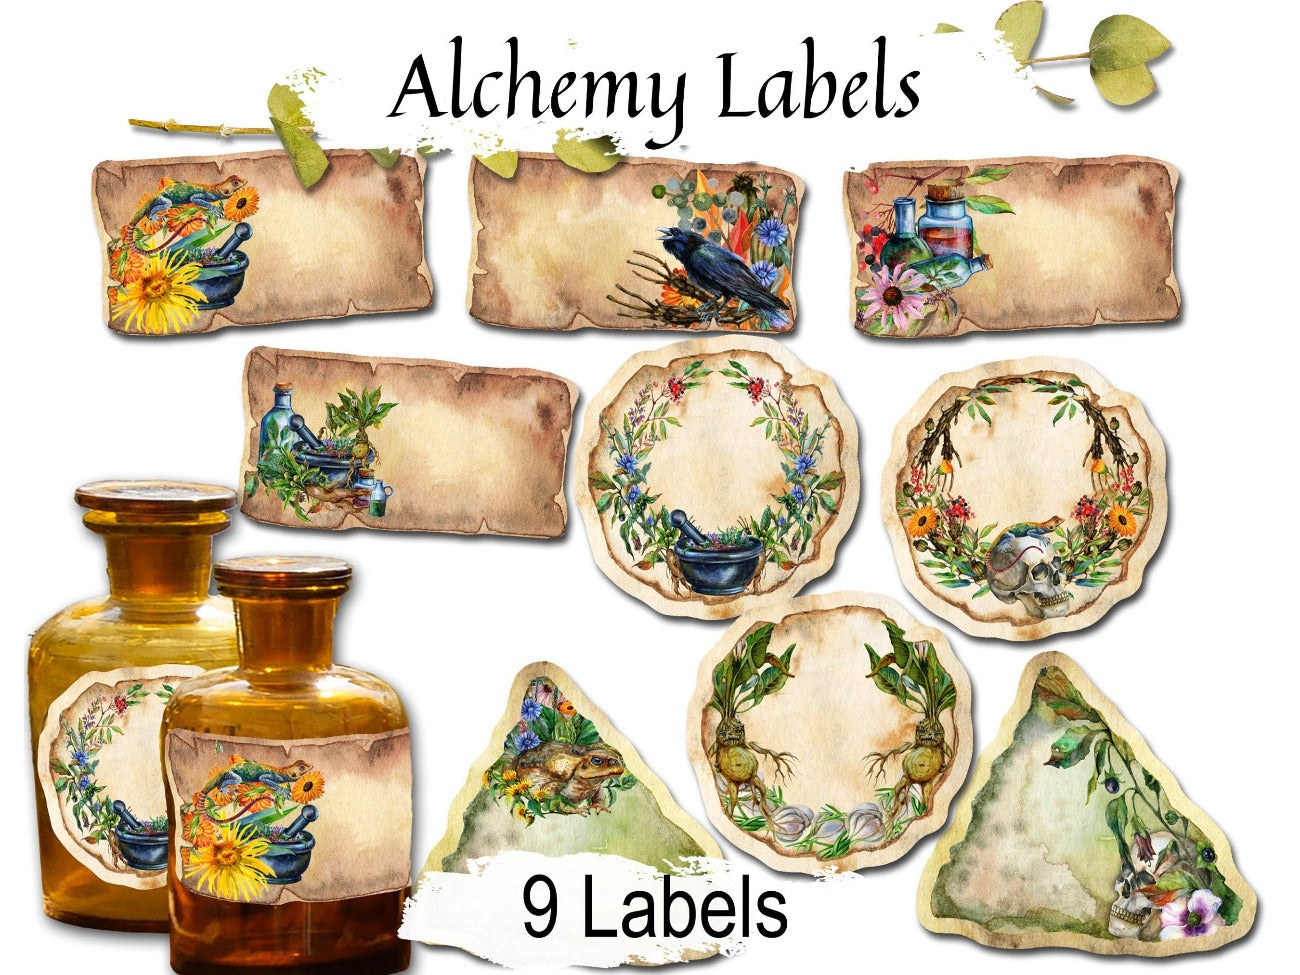 OCCULT ALCHEMY LABELS, Hermetic stickers, 9 printable art labels for your poison potion bottles, occult grimoire journal or Book of Shadows - Morgana Magick Spell